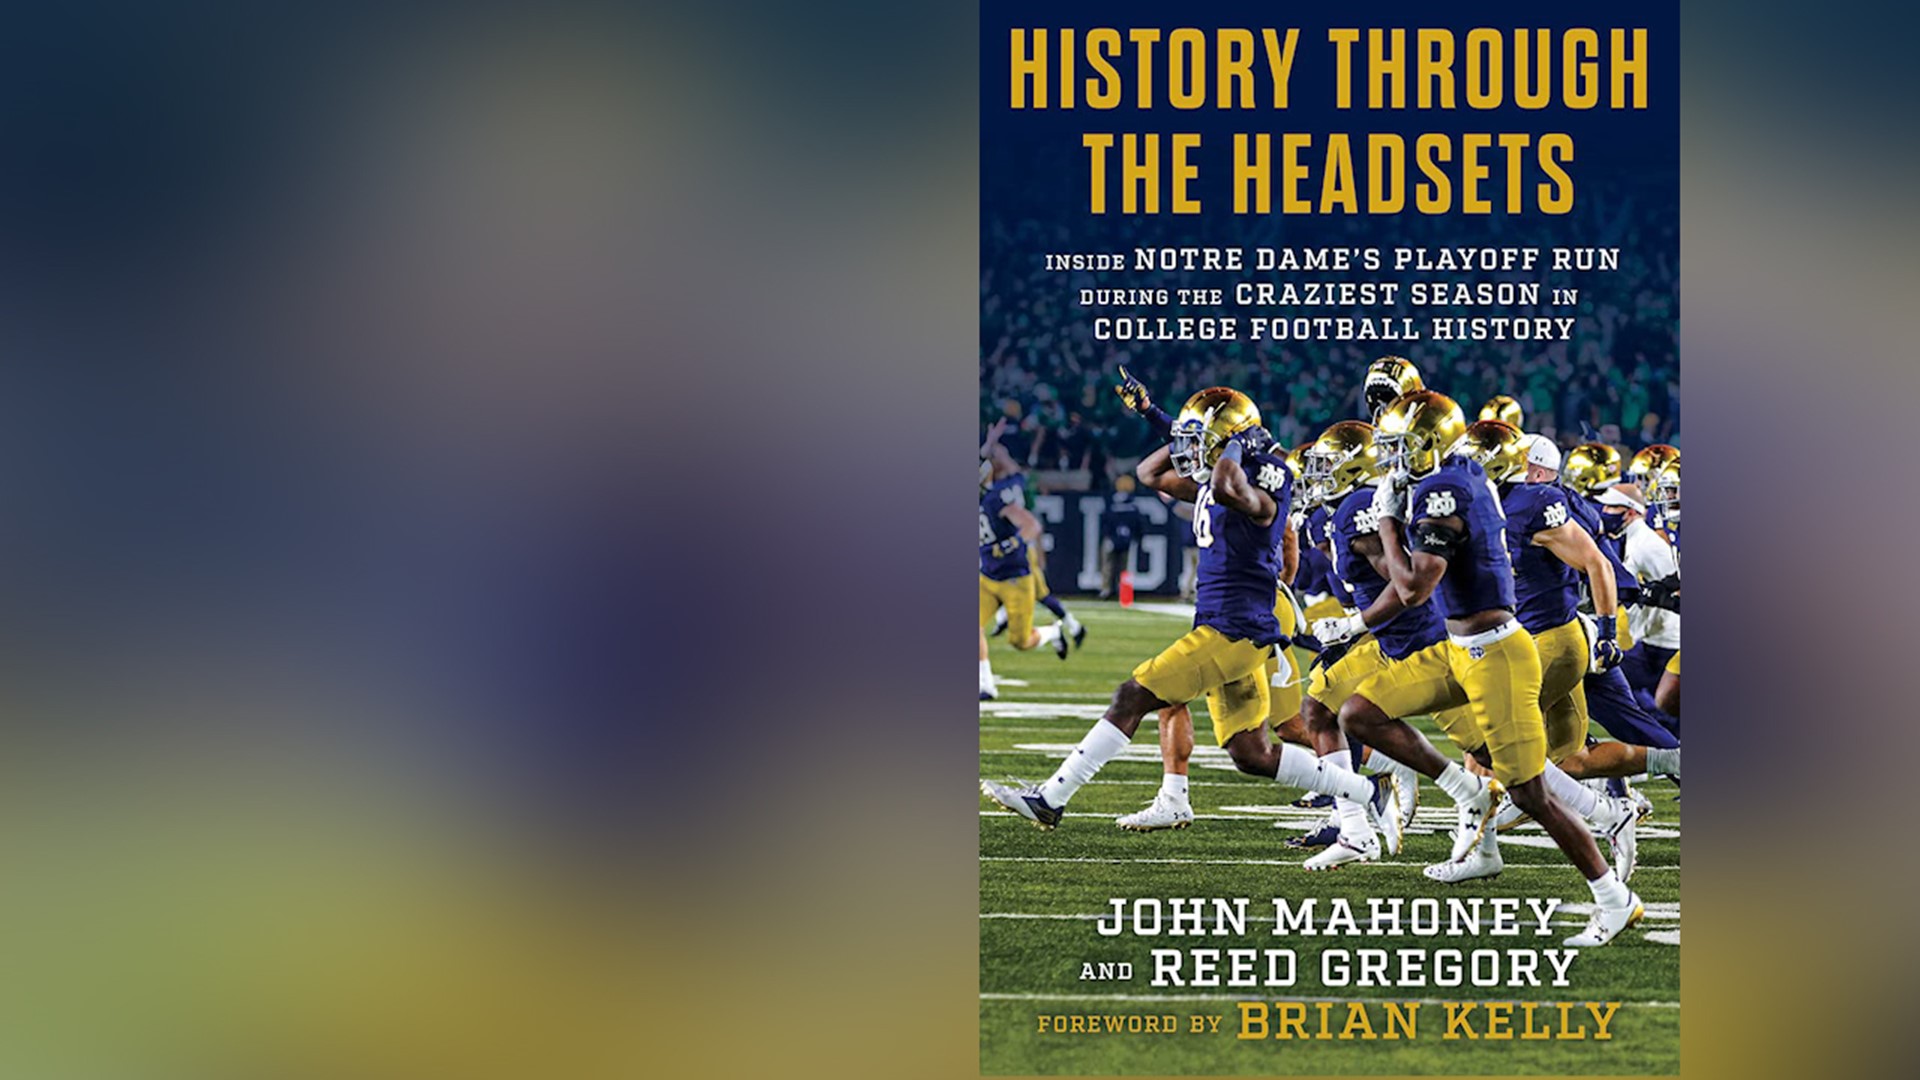 "History Through the Headsets" gives unique perspective on the 2020 college football season for Notre Dame. It's written by John Mahoney and Reed Gregory.